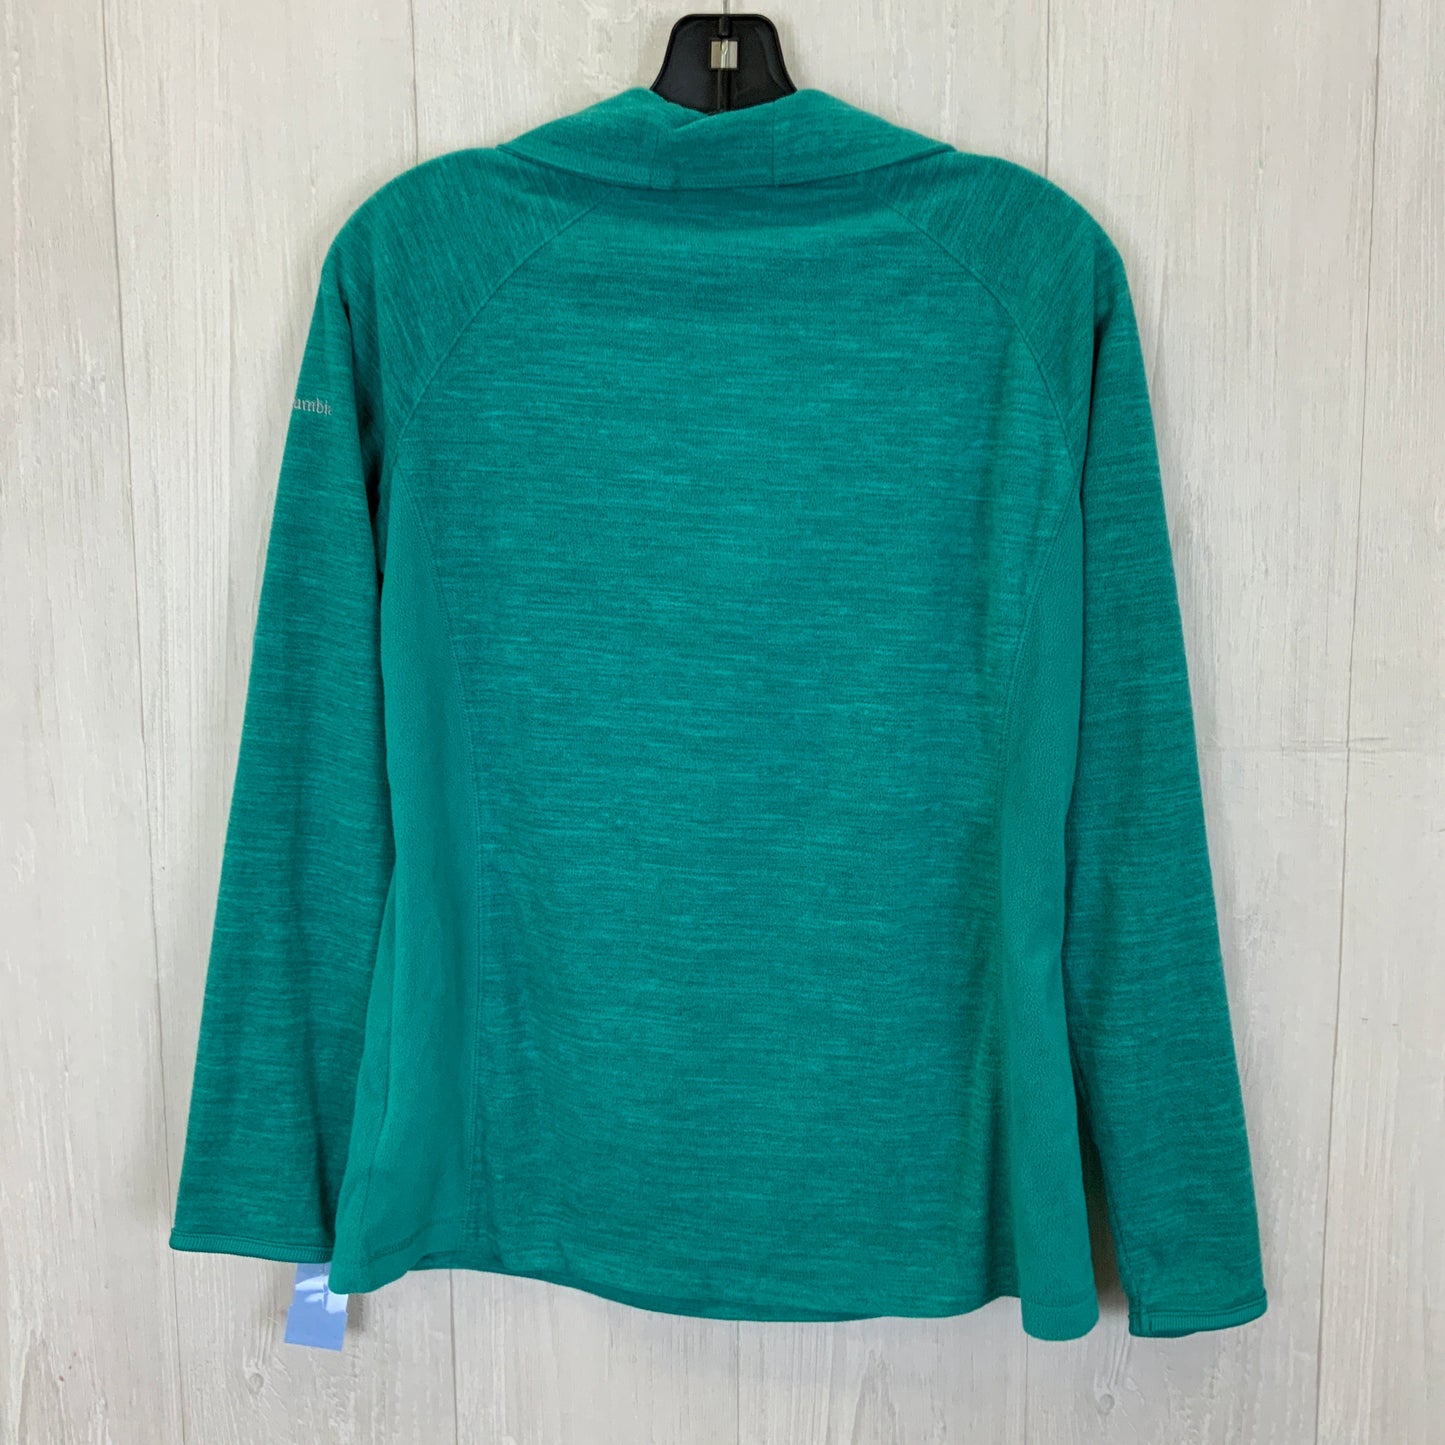 Top Long Sleeve Fleece Pullover By Columbia  Size: M